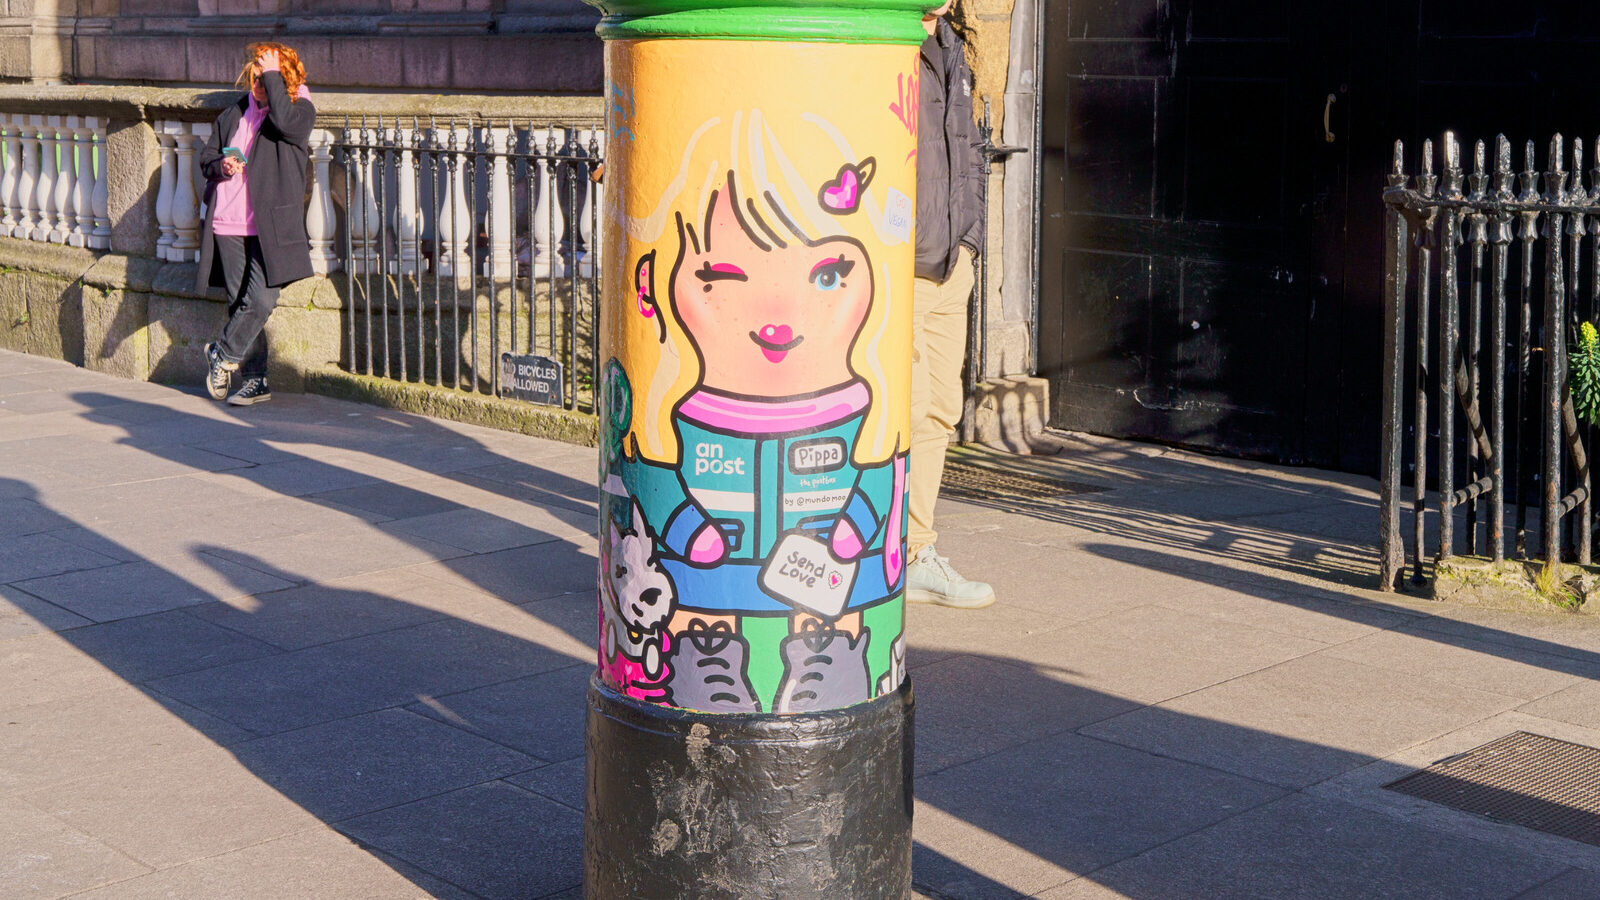 I LIKE THIS POST BOX [HAVE A GOOD ST VALENTINE DAY - DID YOU KNOW THAT YOU CAN VISIT THE SAINT HERE IN DUBLIN]-228025-1